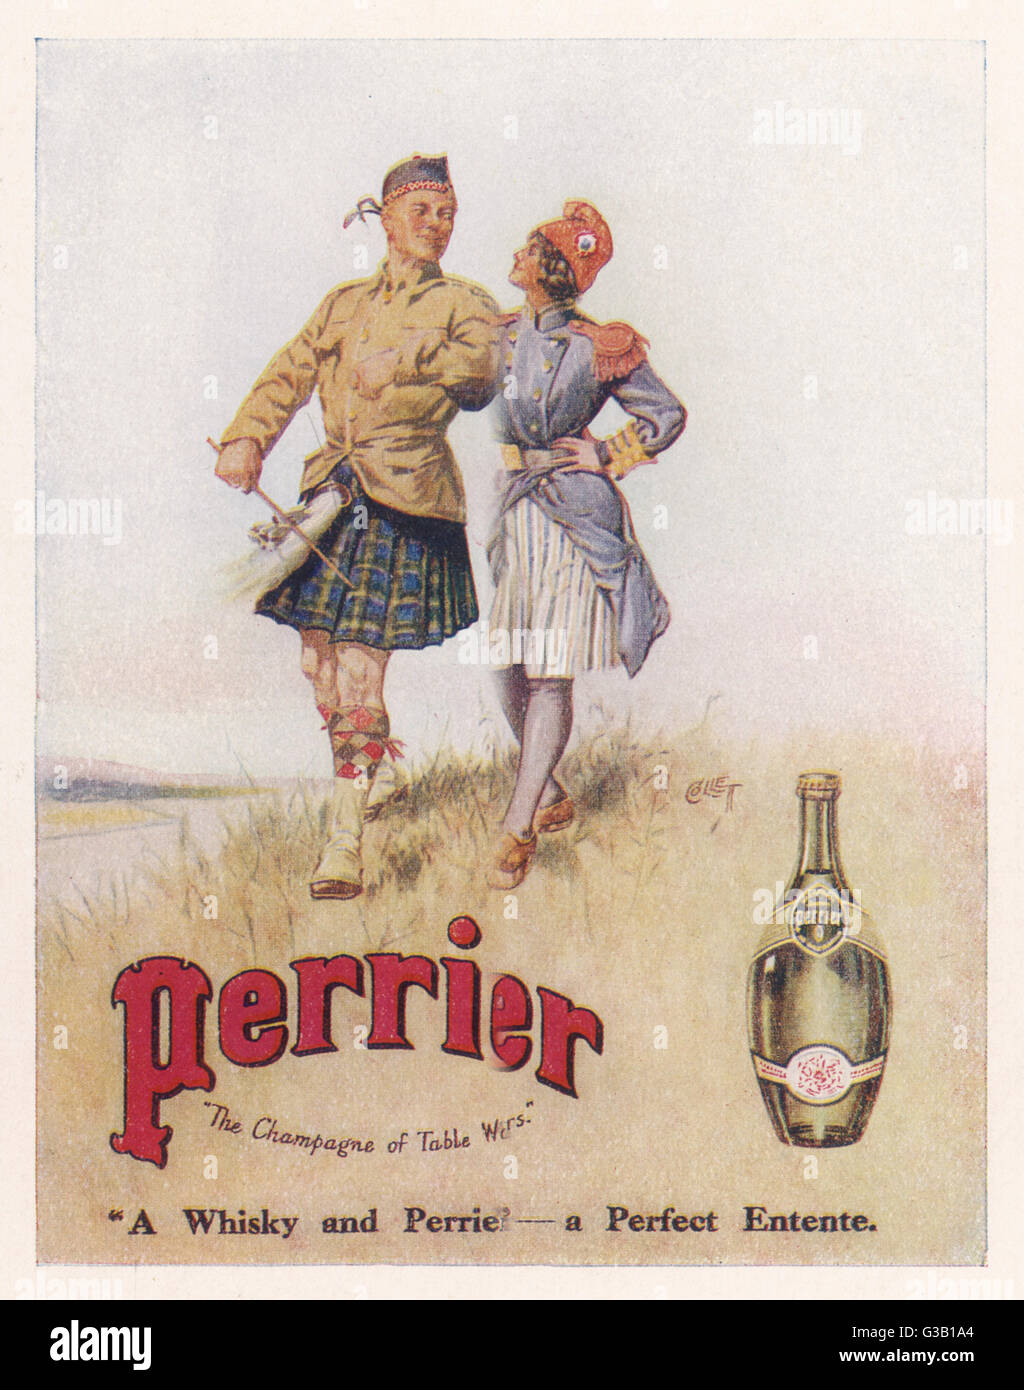 PERRIER WATER  Goes well with whisky        Date: 1914 Stock Photo